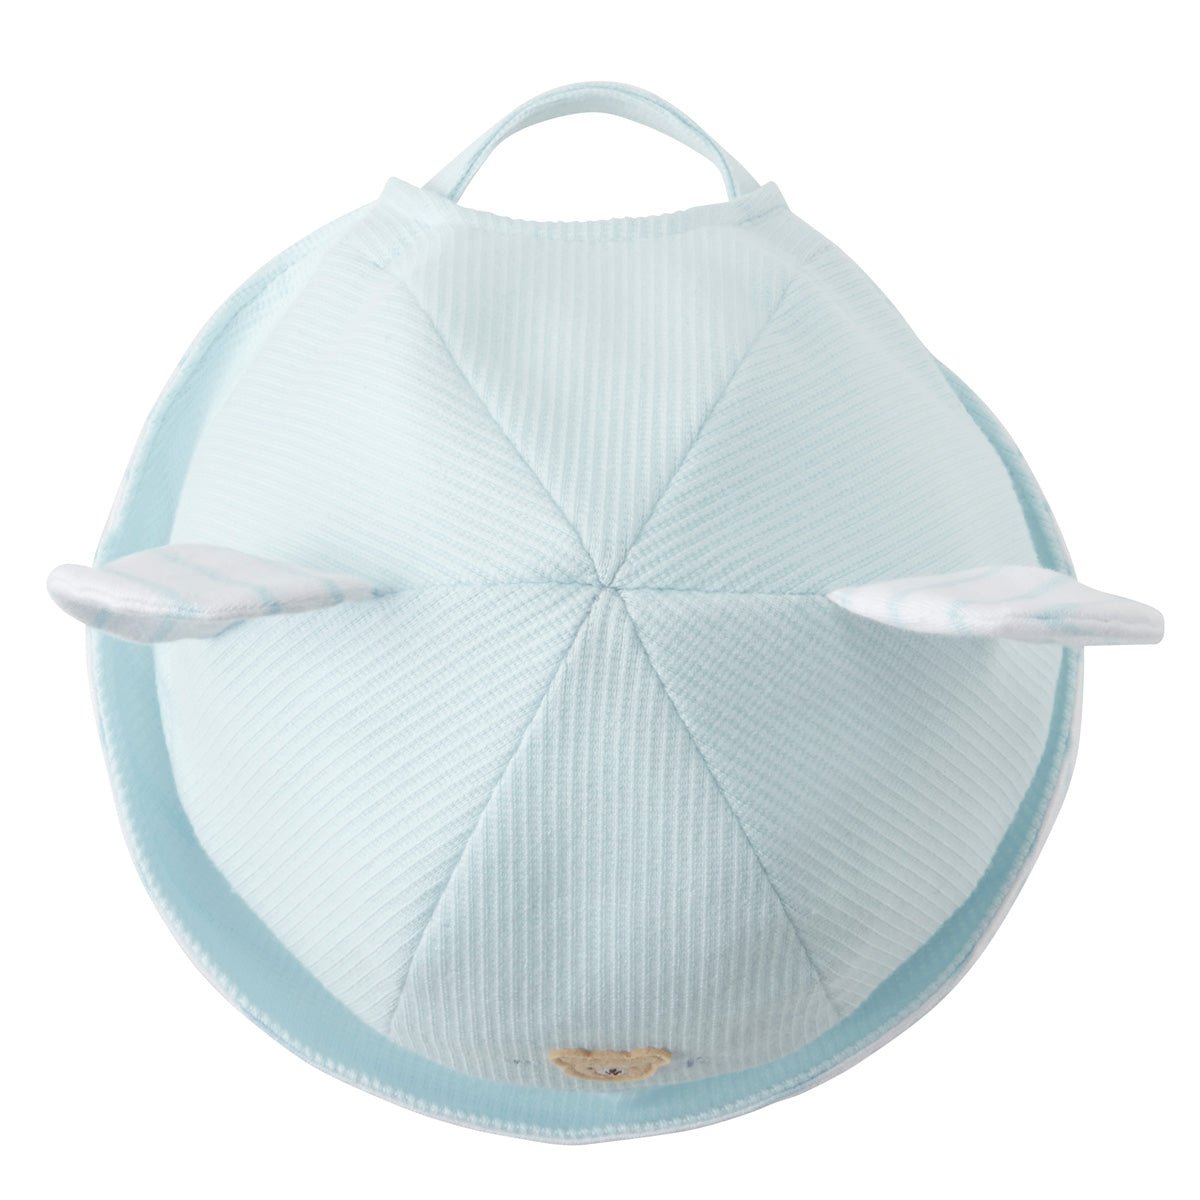 UV Protection Sweatless Baby Hat with Safe Strap - 42-9105-261-15-SS